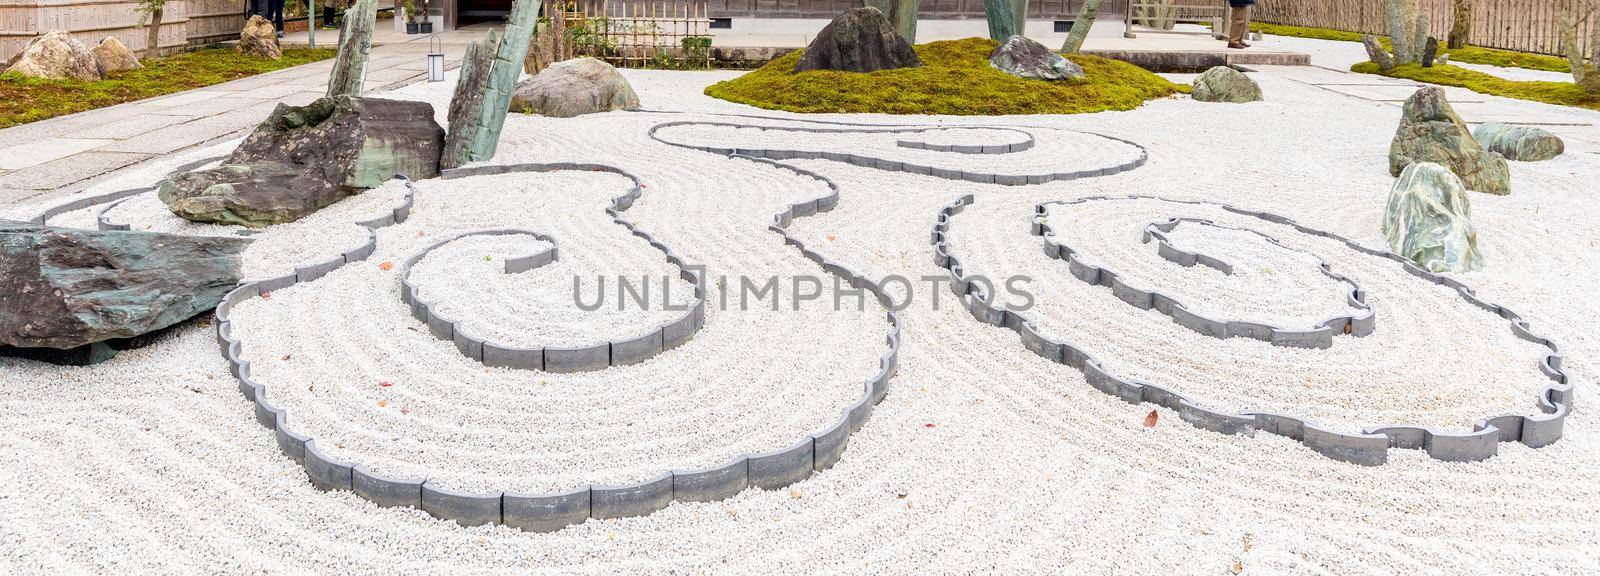 Japanese zen garden meditation stone in lines sand for relaxation balance and harmony spirituality or wellness in Kyoto,Japan by Nuamfolio